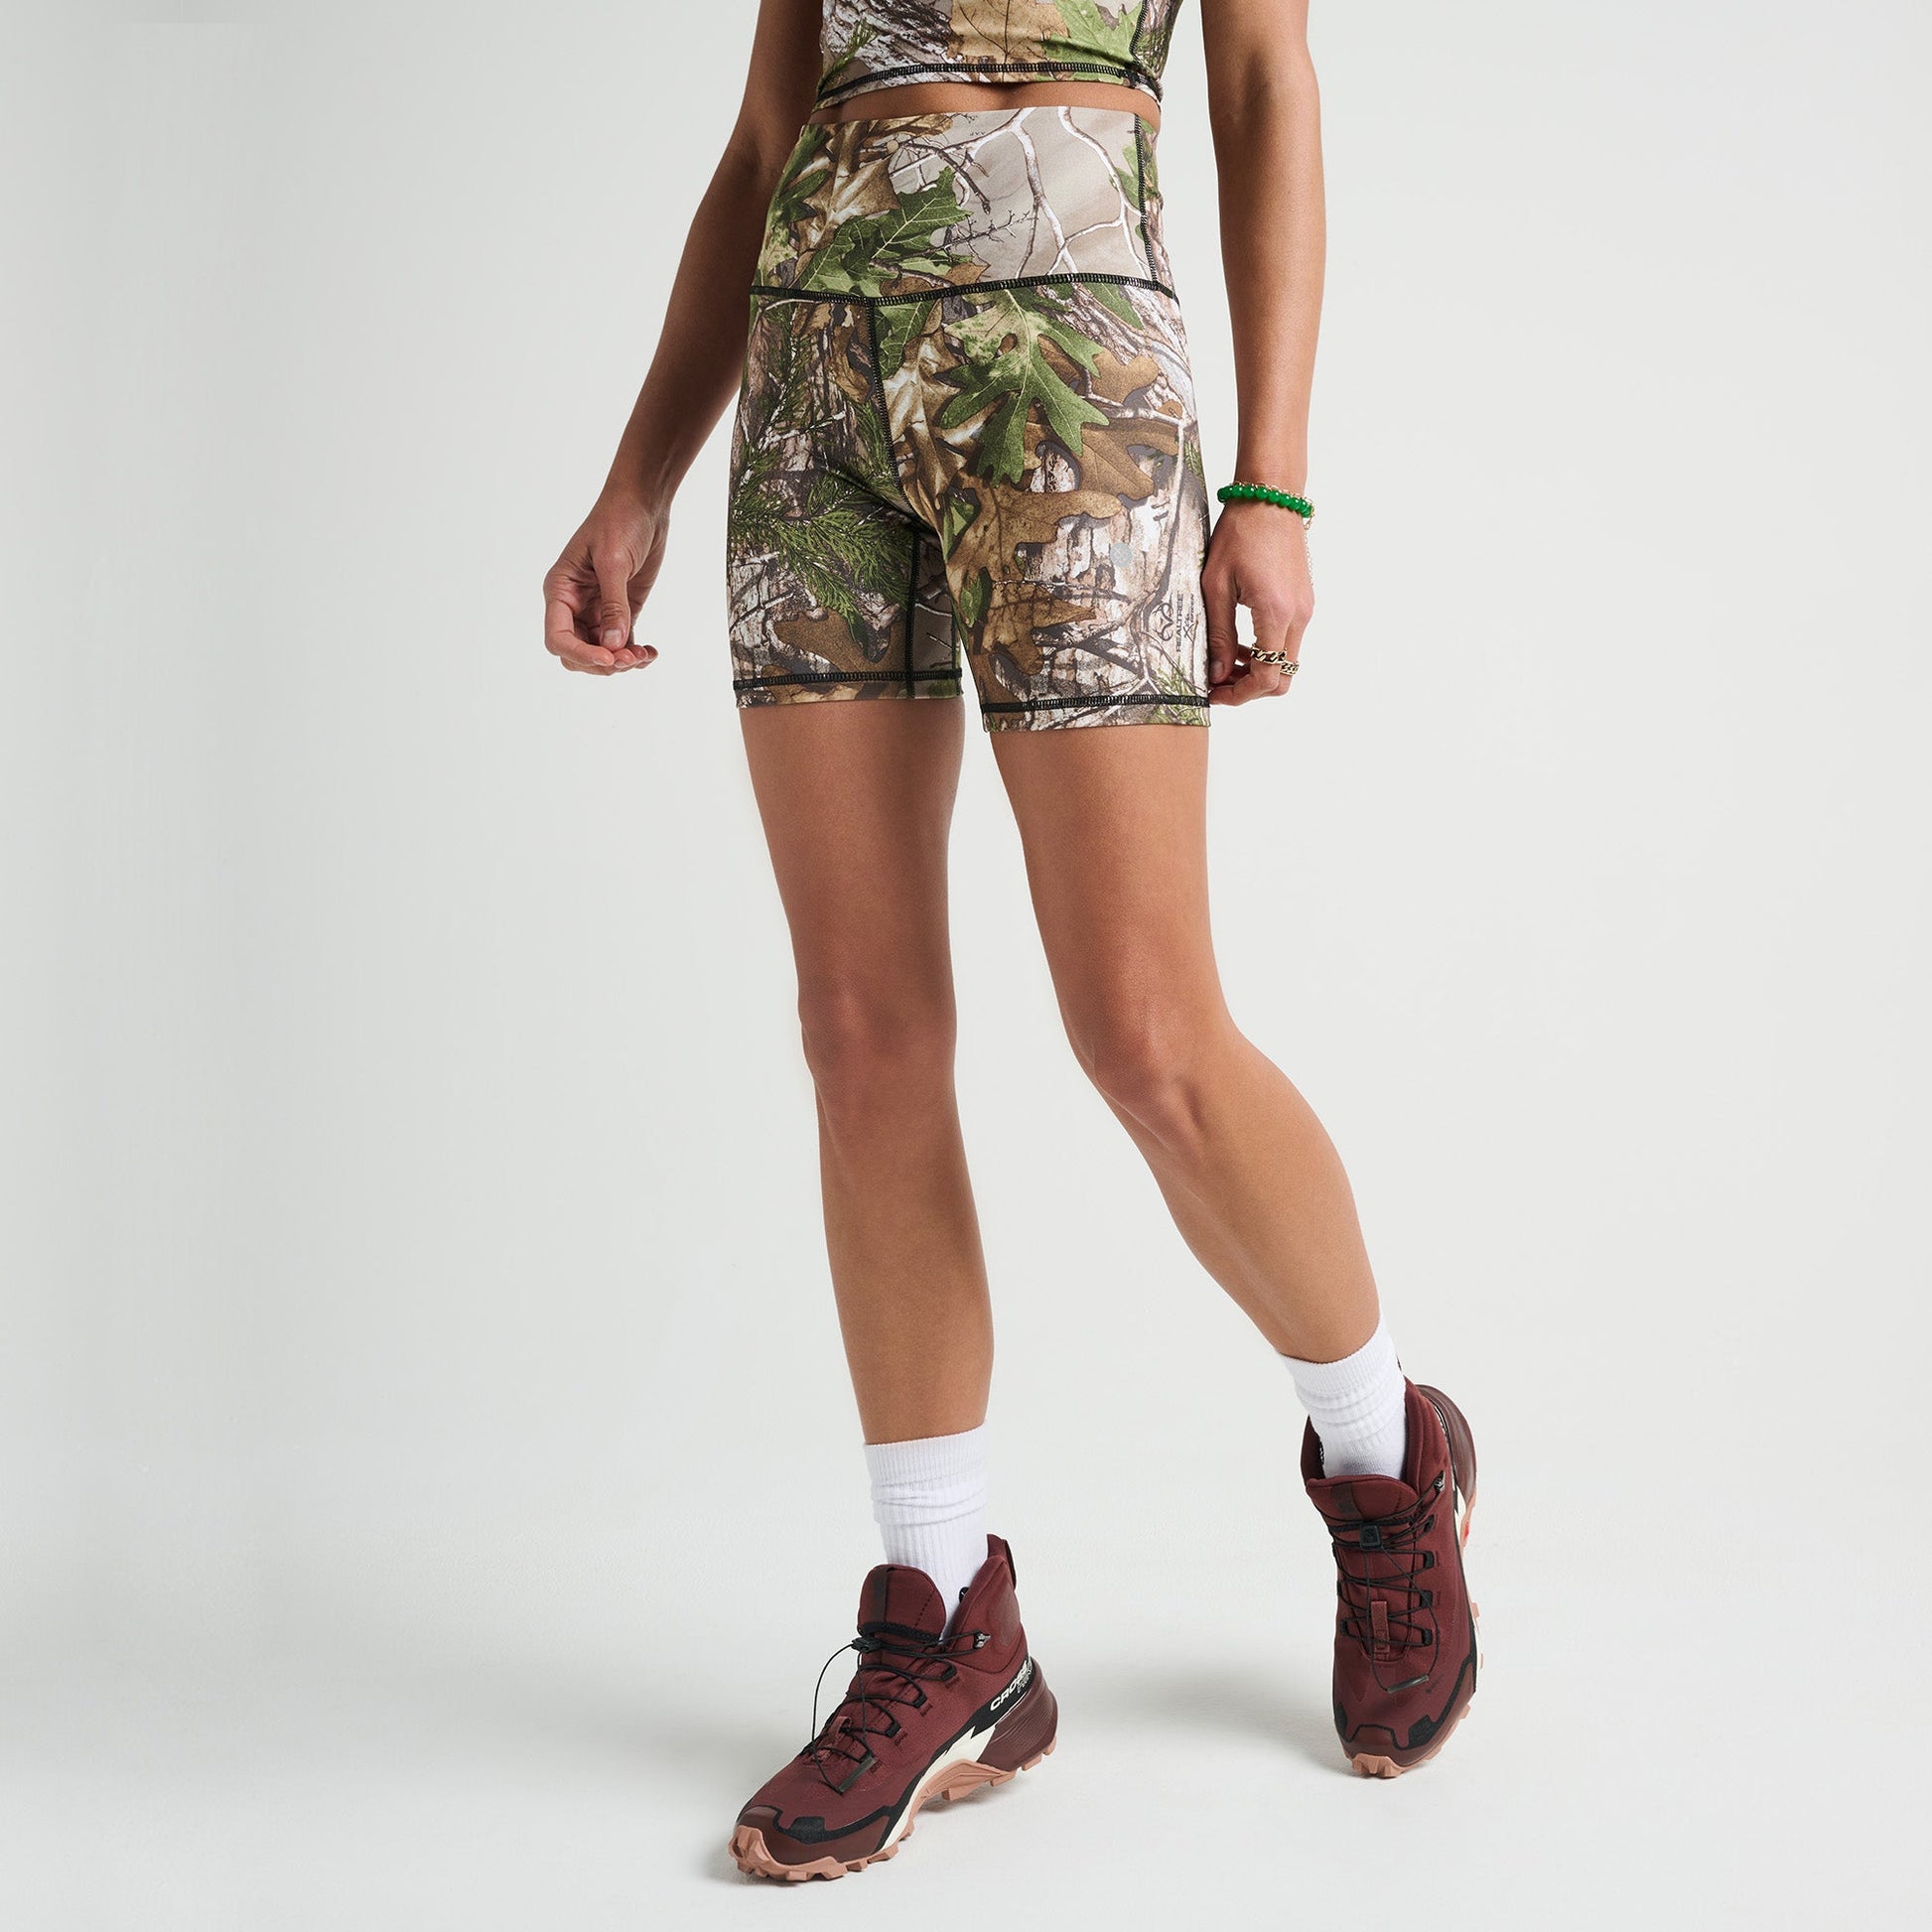 Realtree Shorts for Women